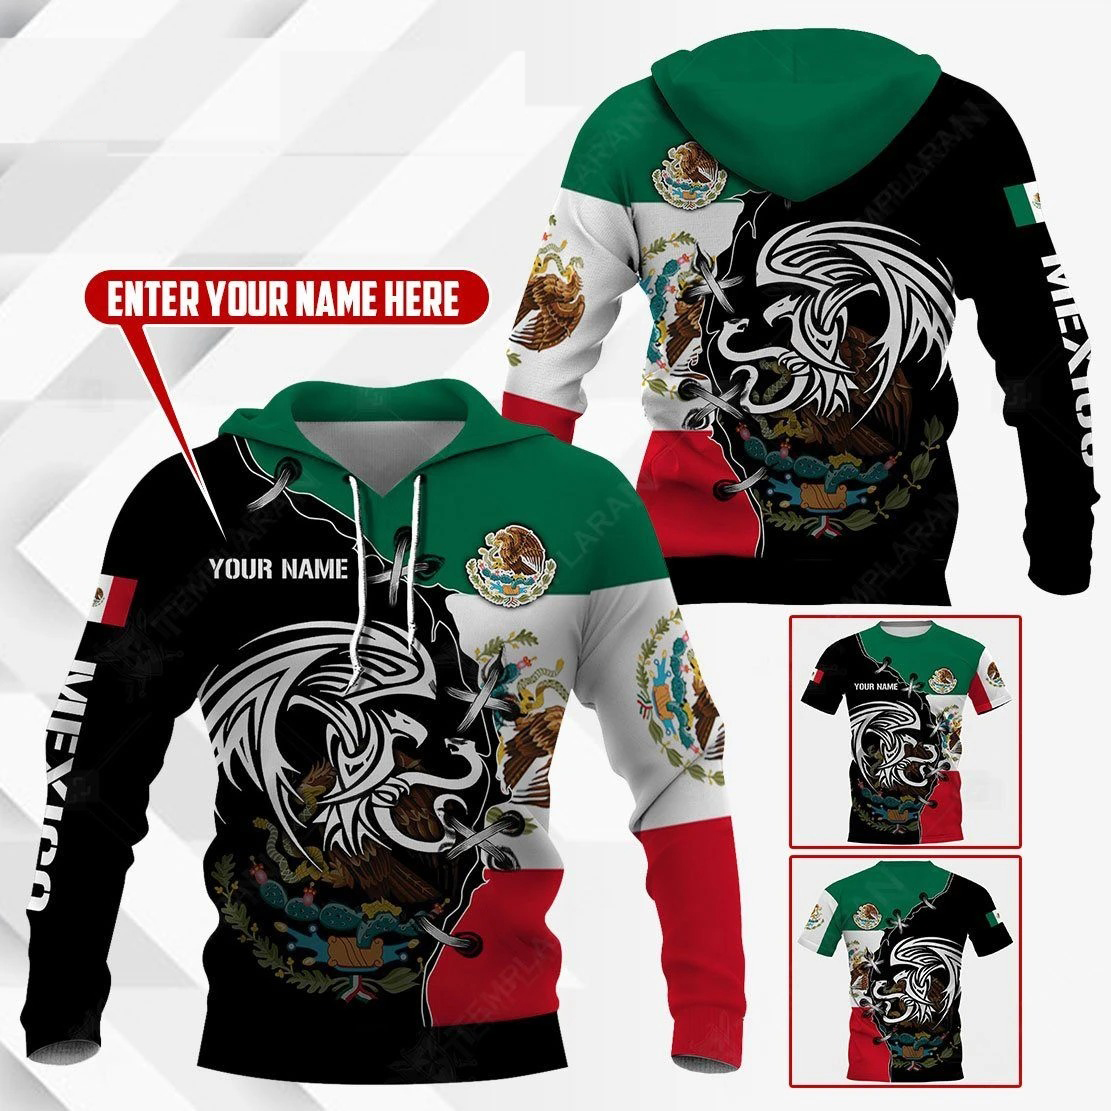 Mexico golden eagle personalize custom name 3d full printing hoodie